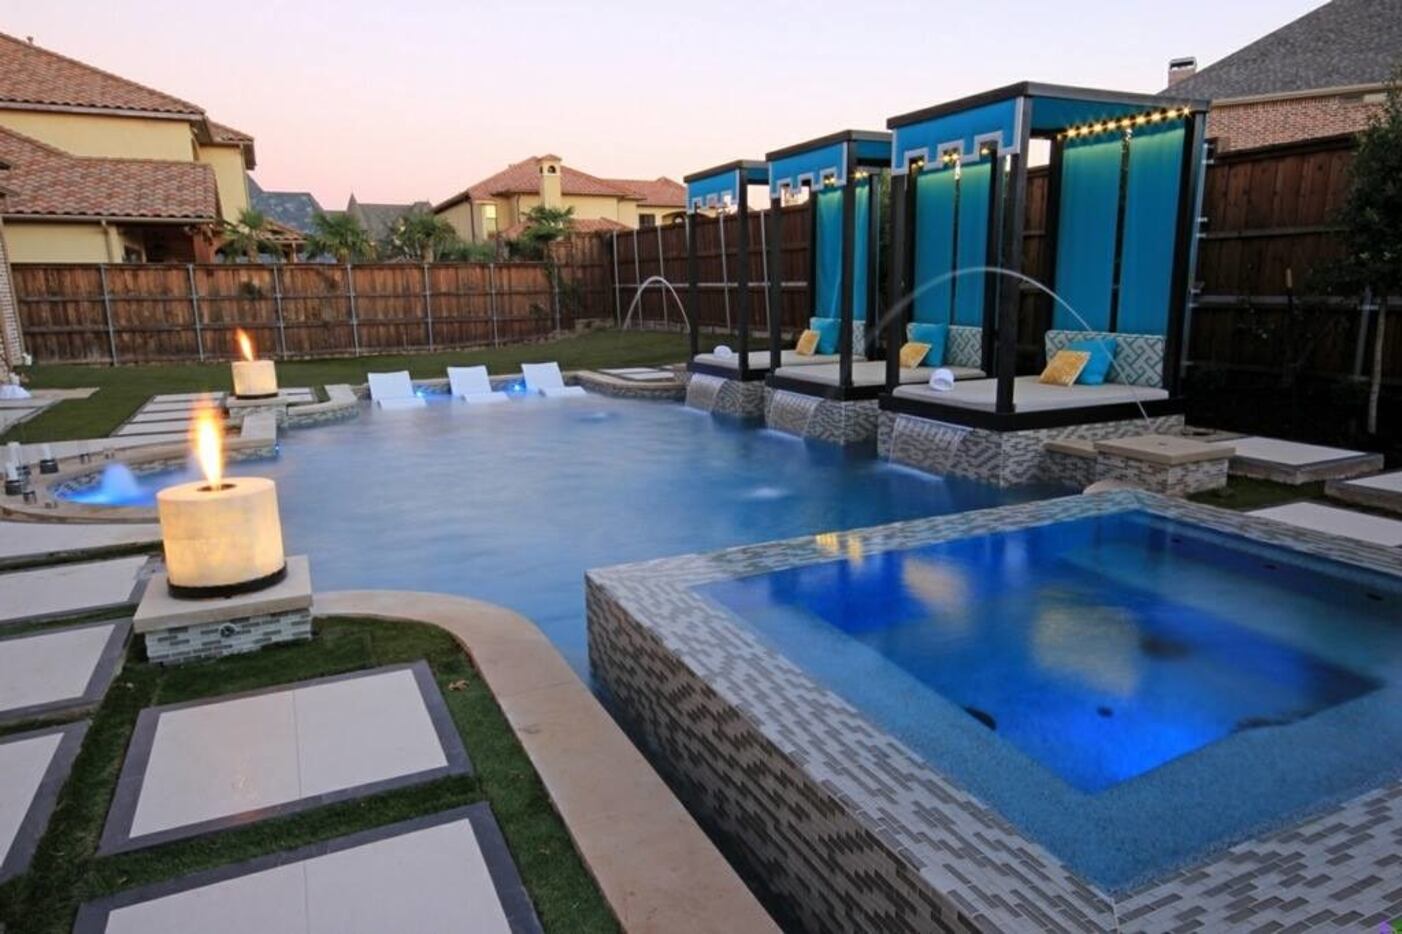 When considering seating, don't rule out cabana-style options for poolside spaces, Elaine...